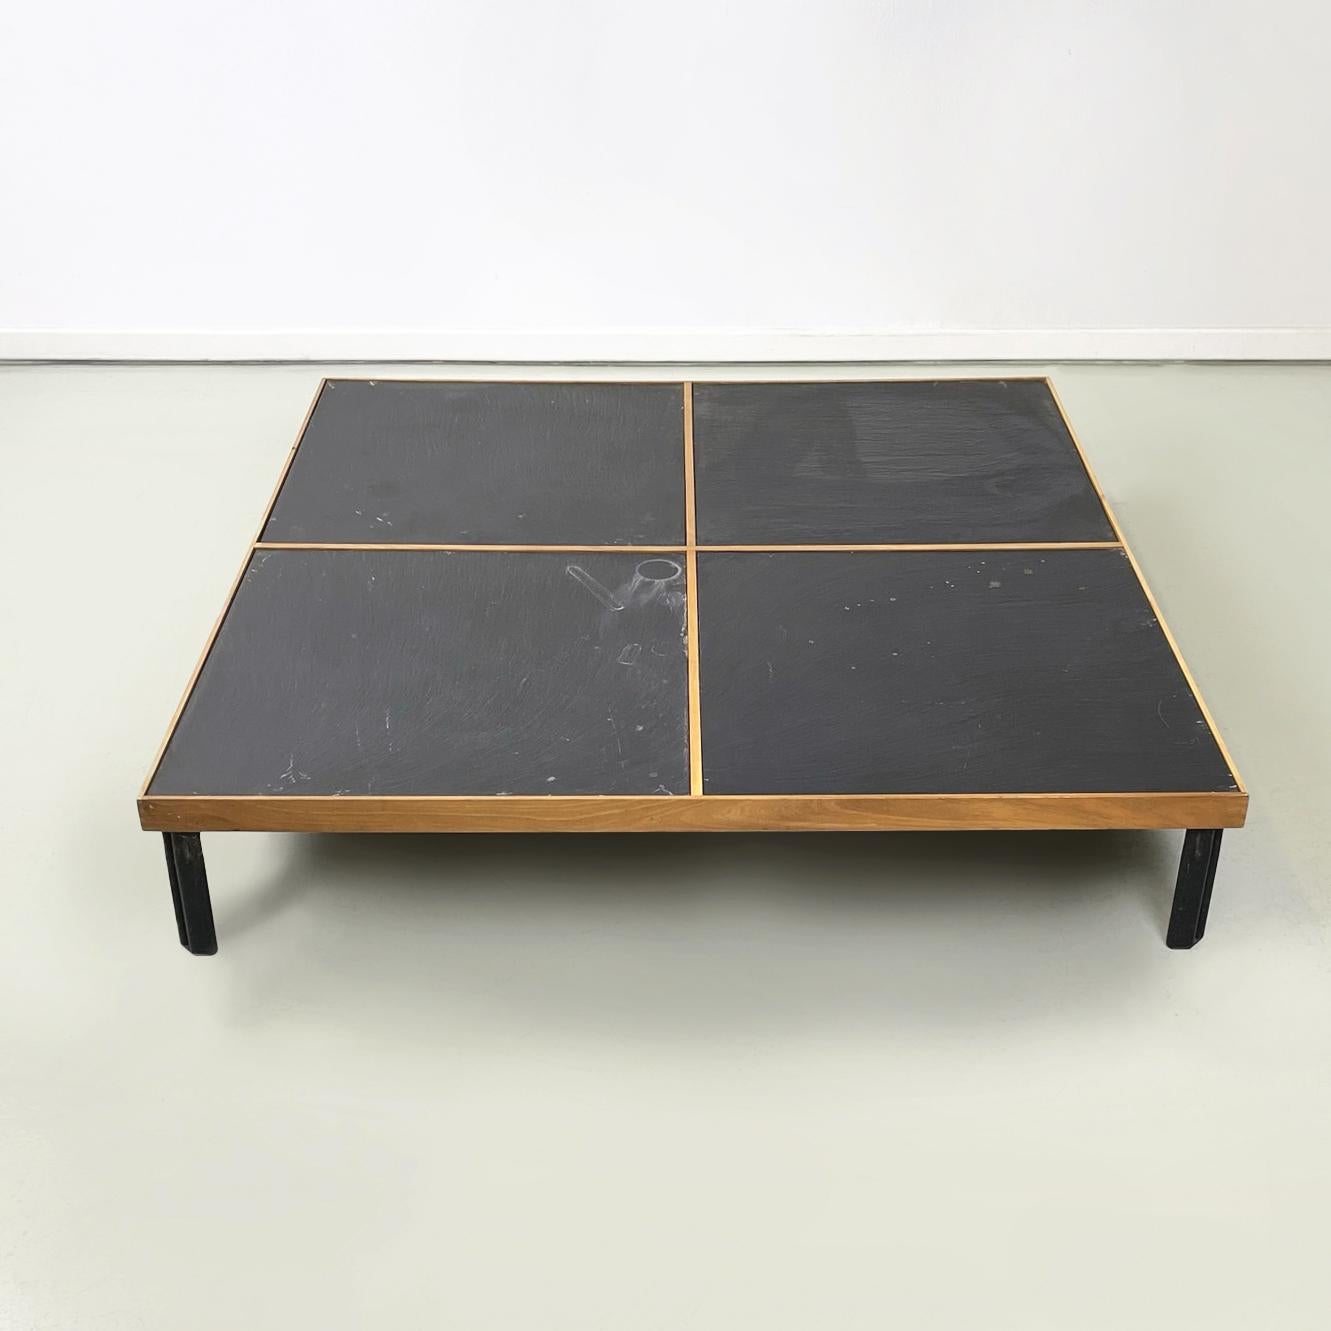 Metal Italian modern Slate wood metal Coffee tables by De Martini for Cassina, 1980s For Sale